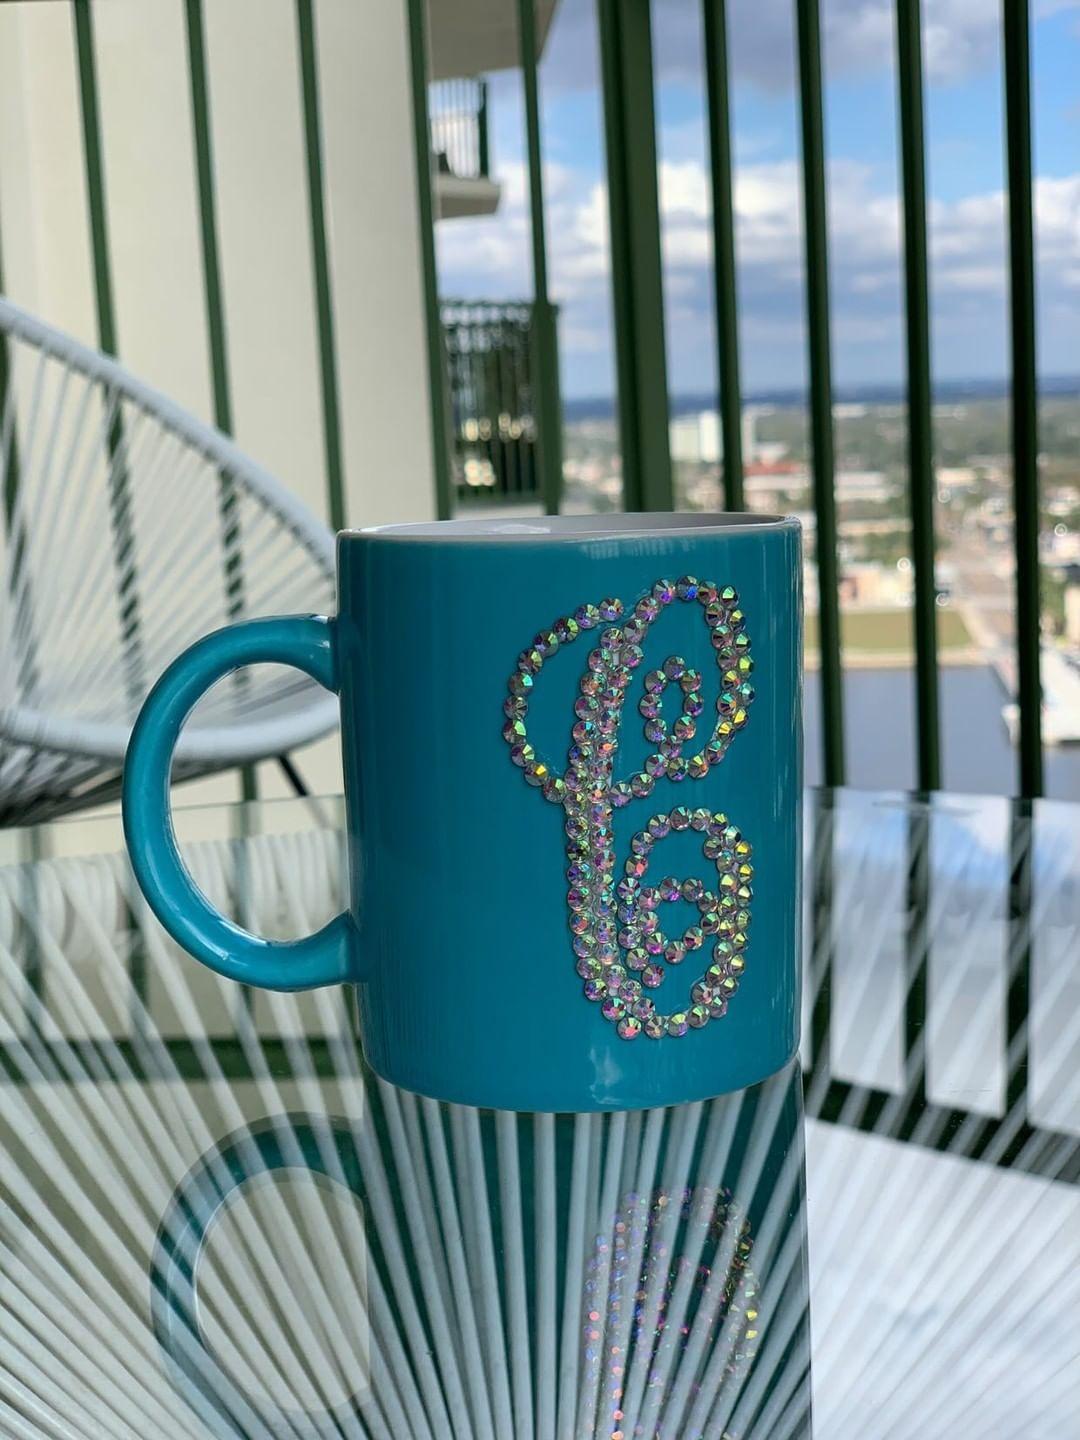 Blue Bling Cup – Perfectly Aligned Creations